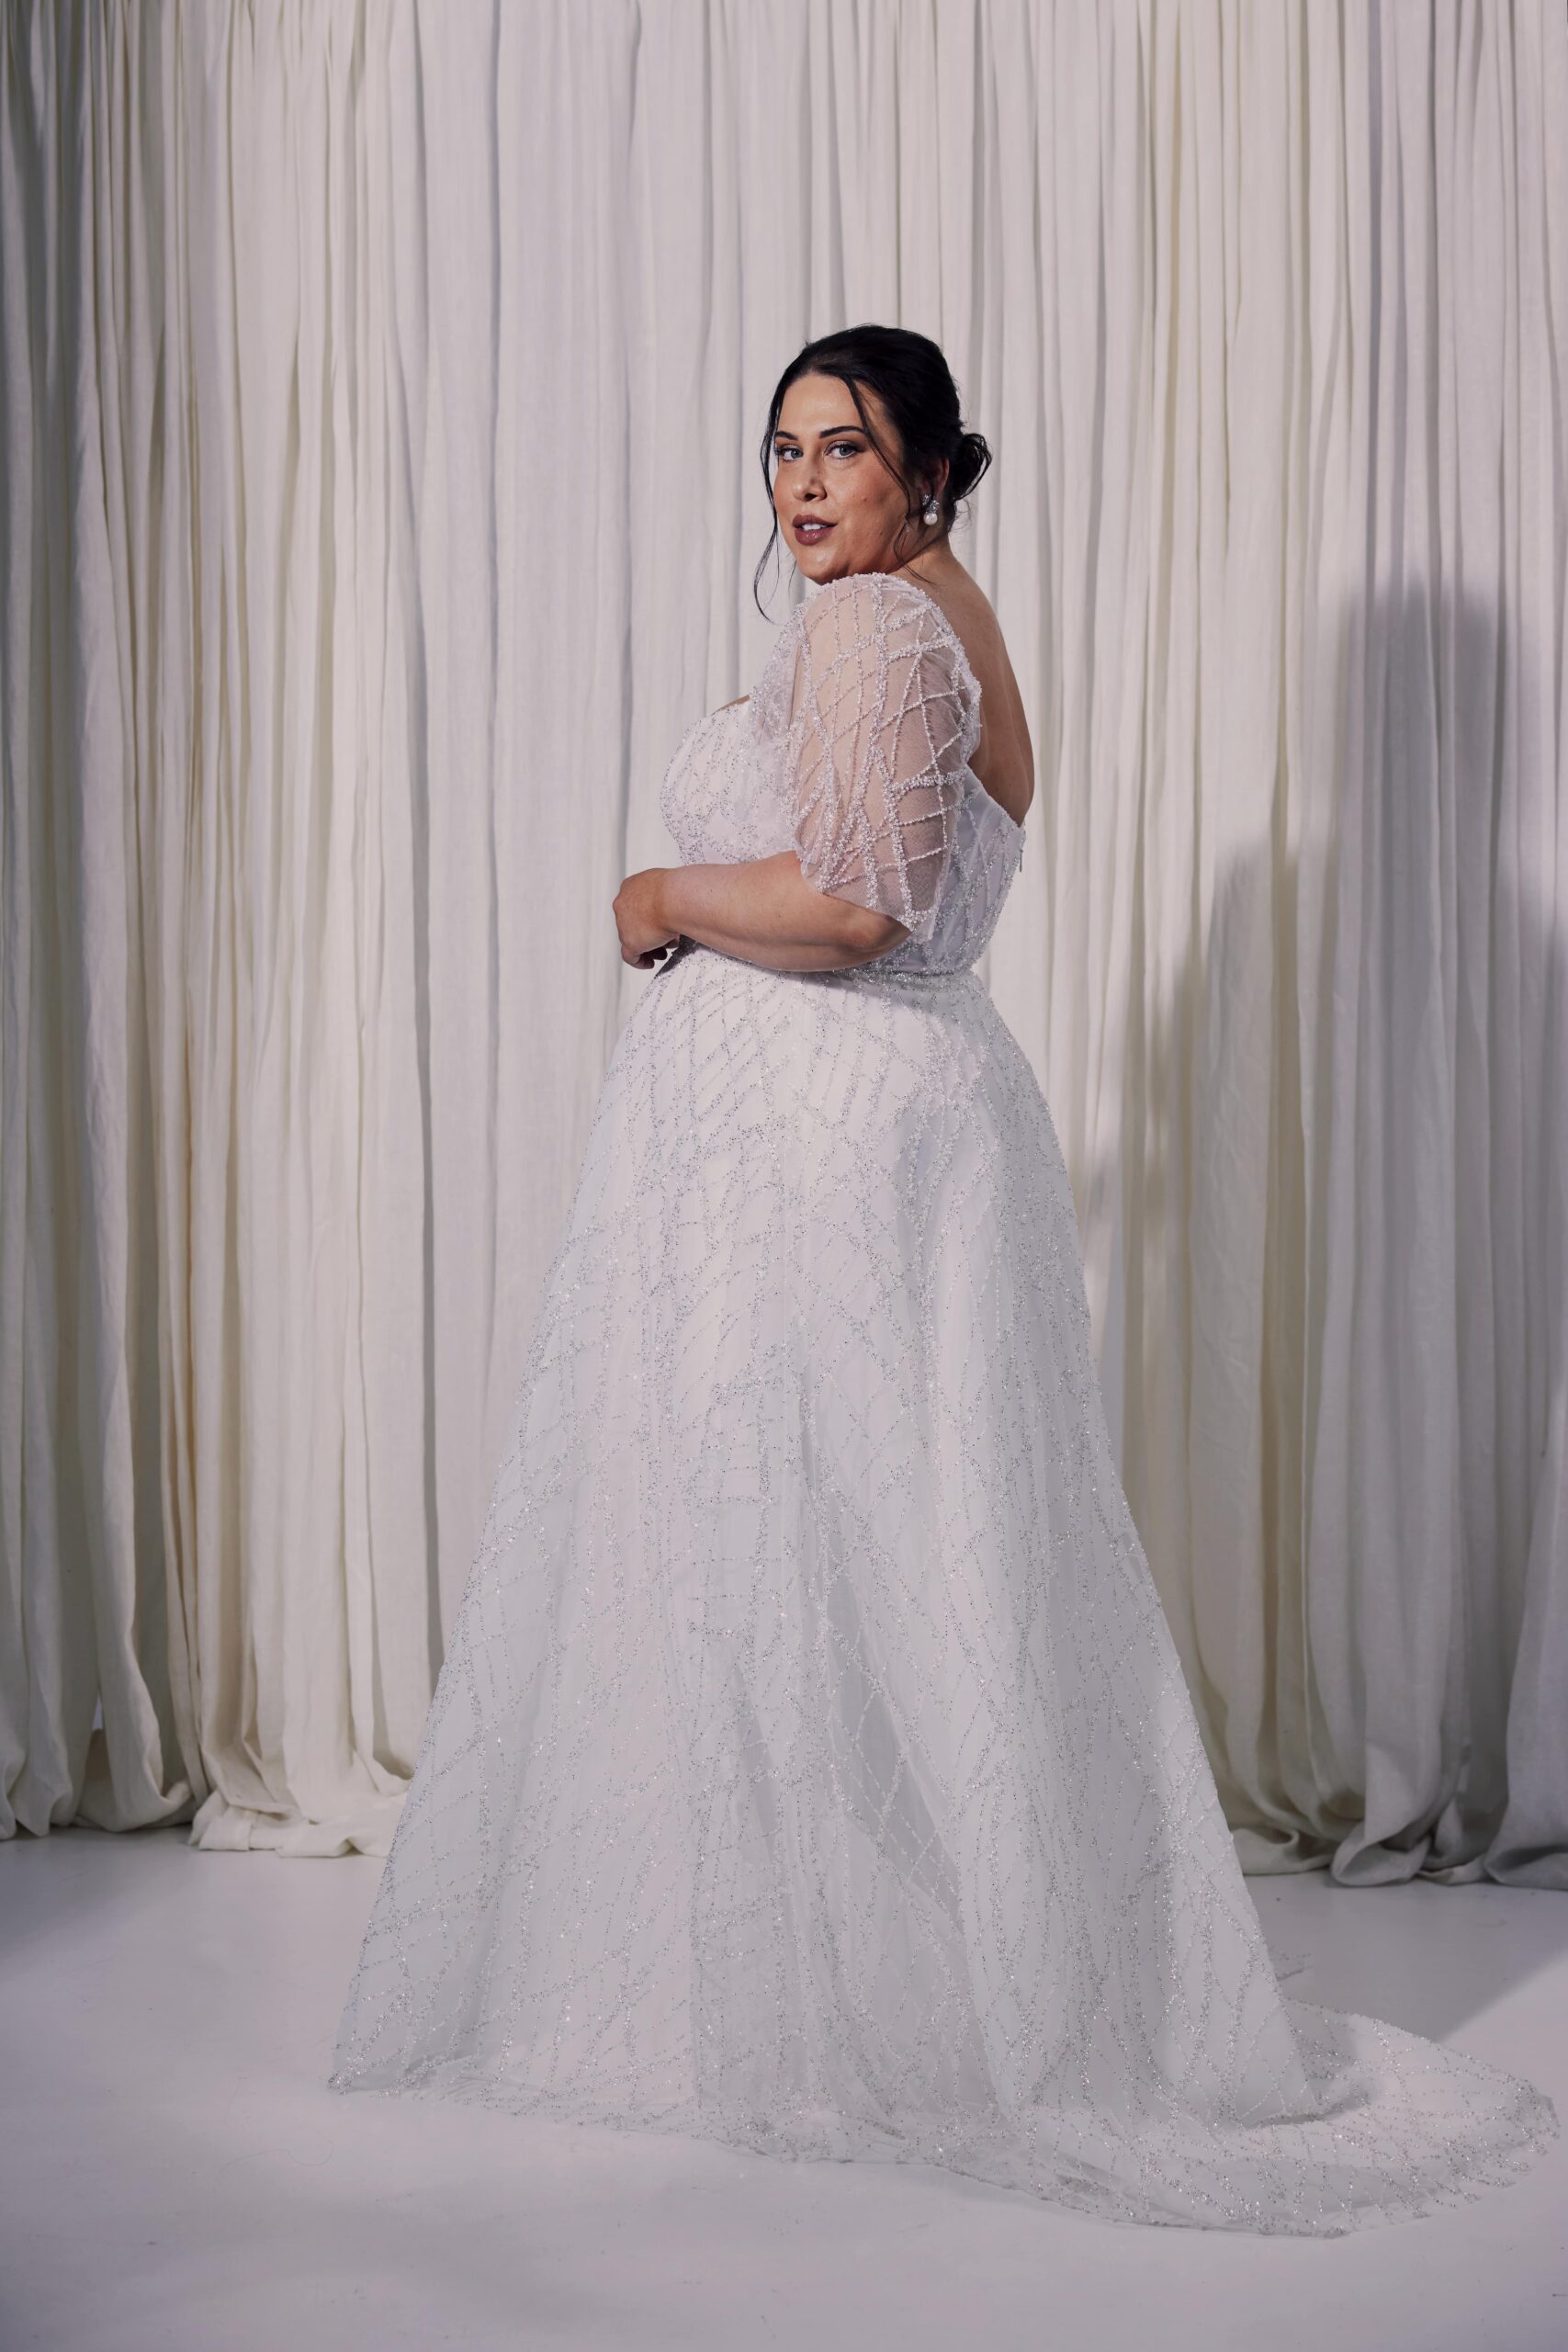 The Diamond gown - a beaded tulle A-line gown with a structured corset bodice, square neckline and flutter sleeves.